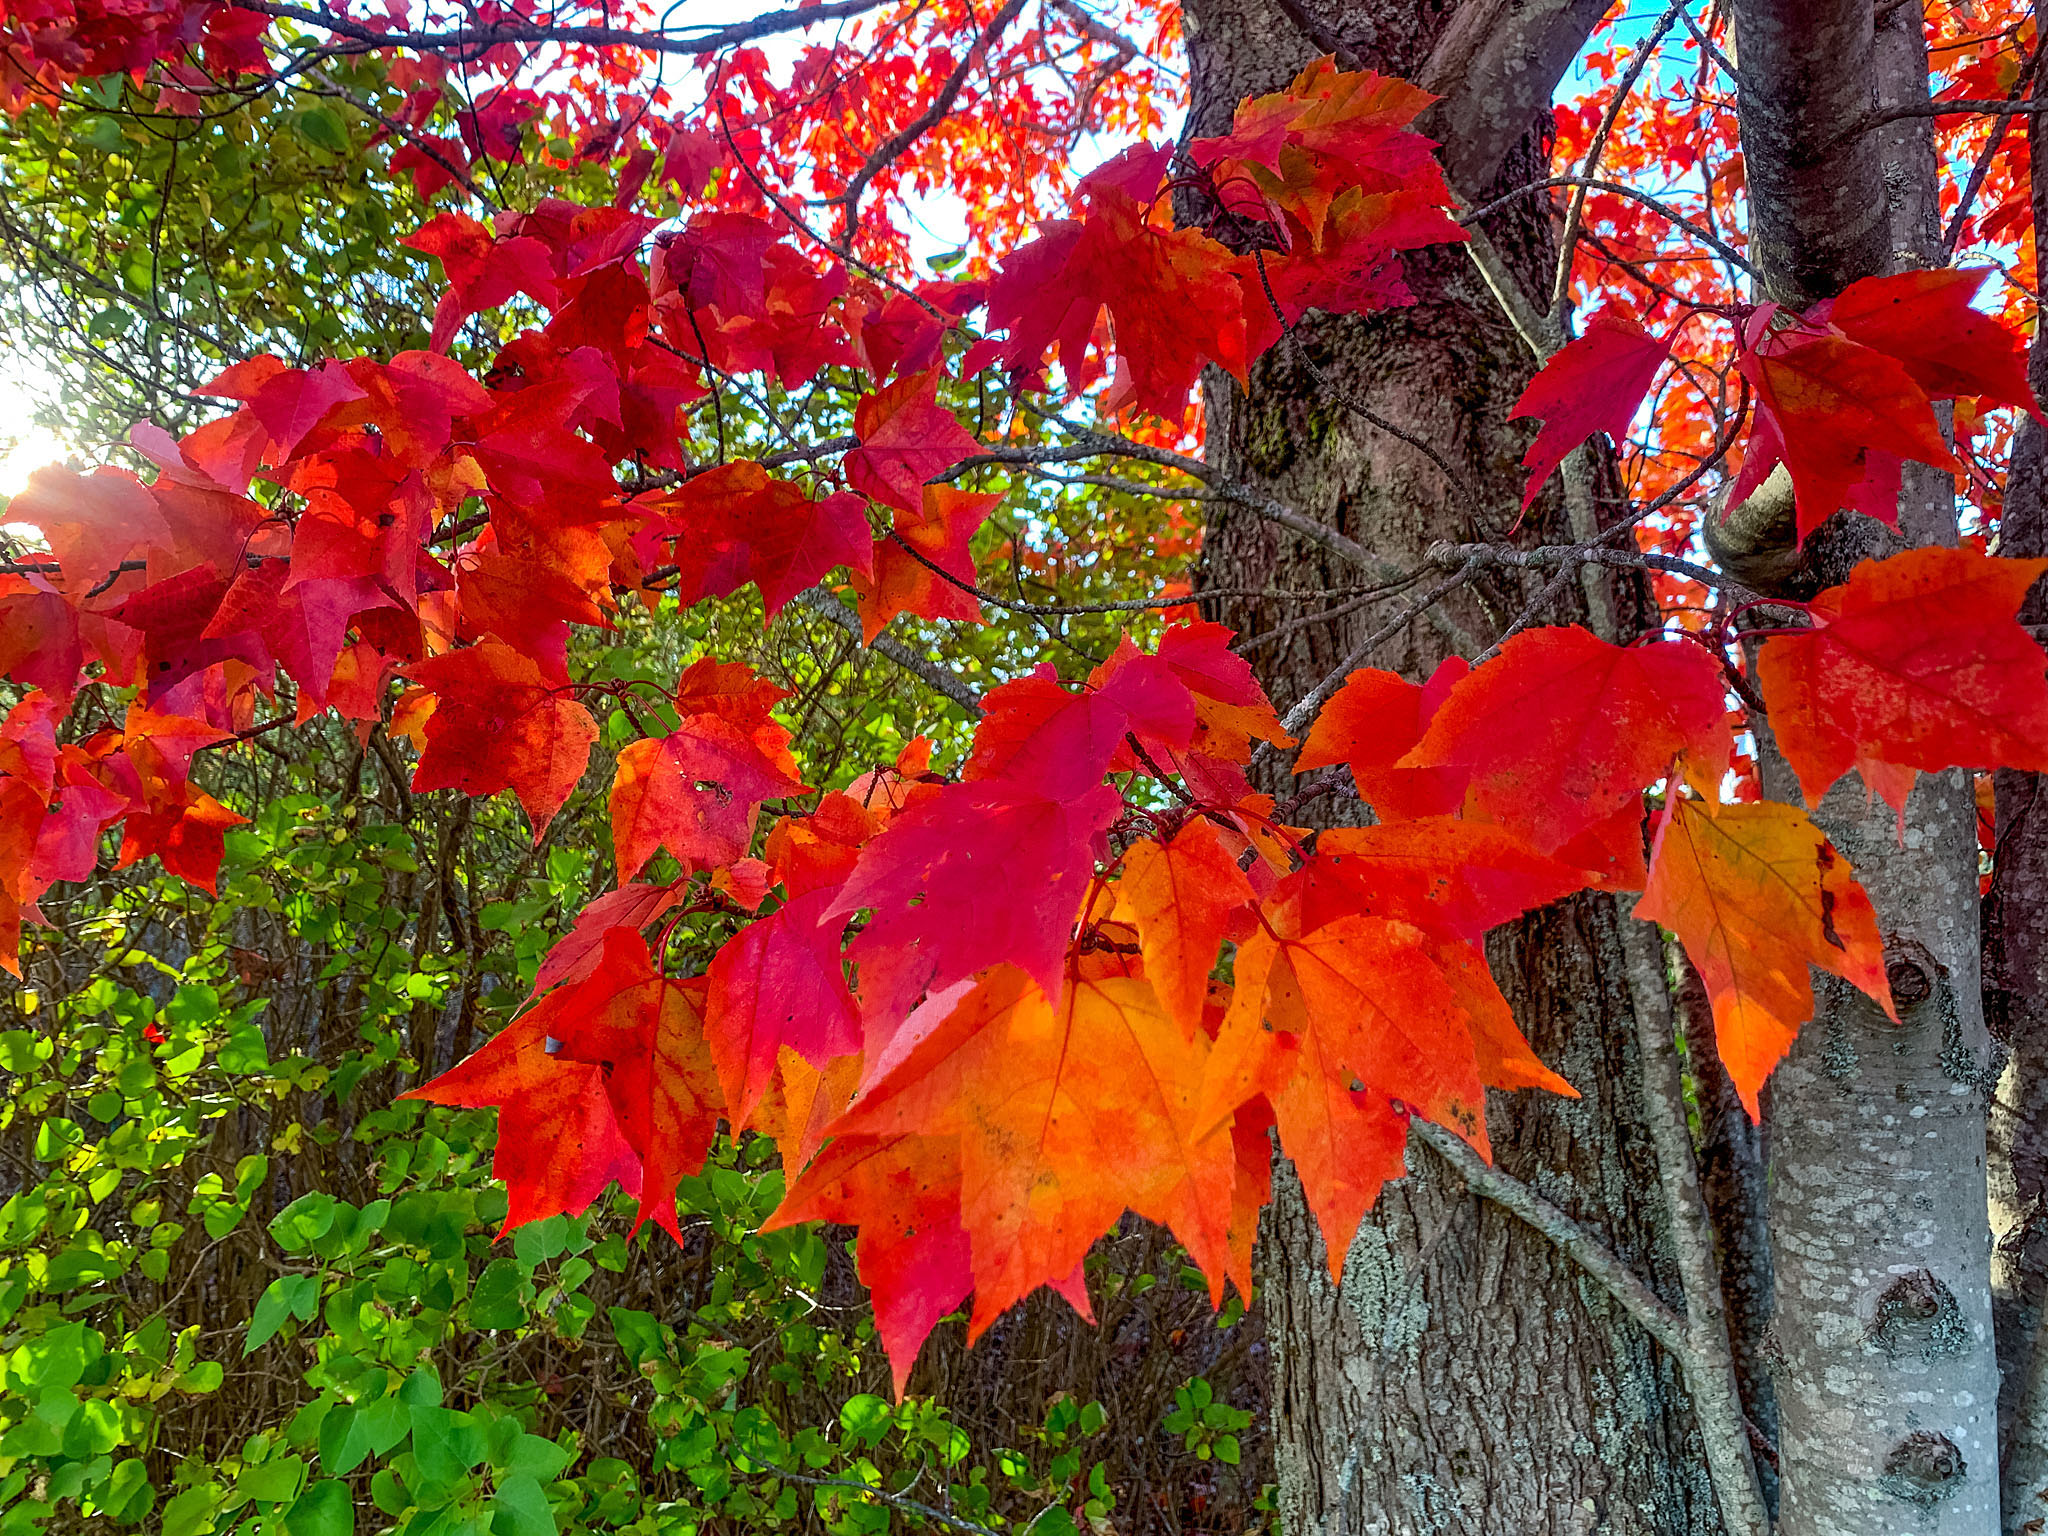 Red Maple leaves  Photo by Jodi DeLong